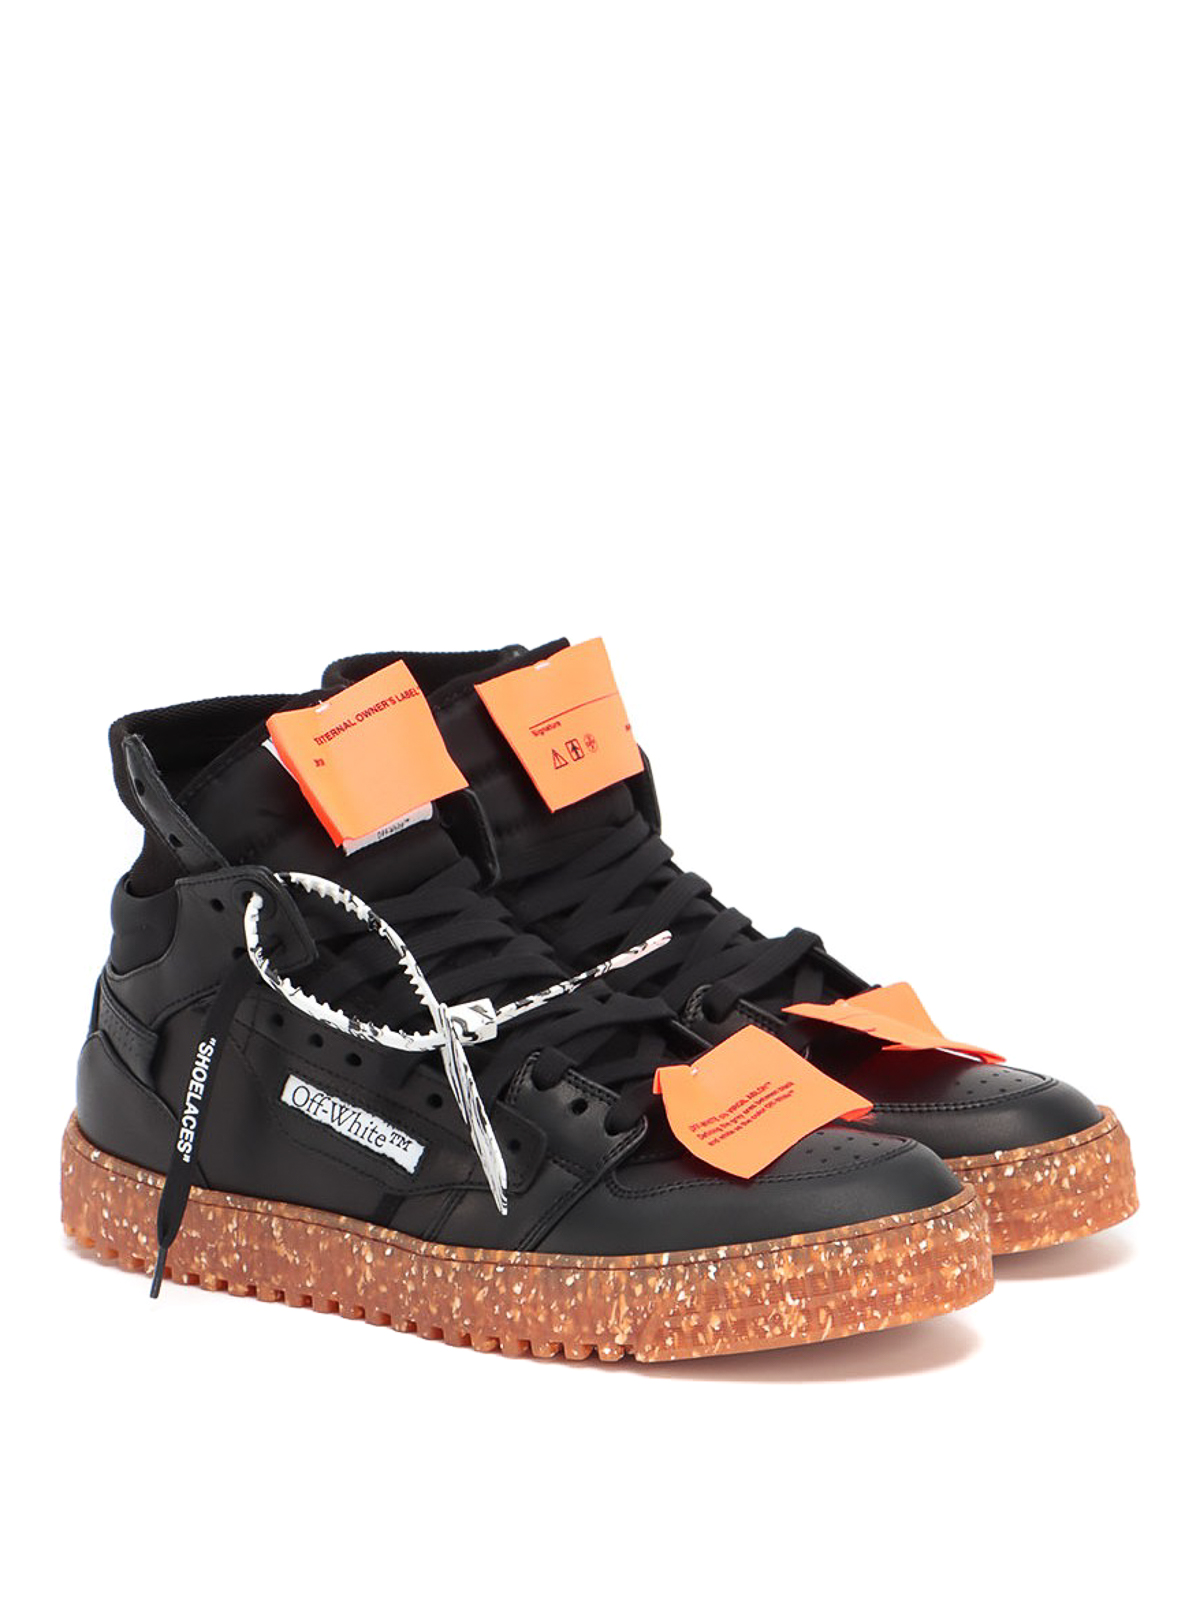 Off-White Men's 3.0 Off Court Leather High-Top Sneakers, Black Orange, Men's, 10D, Sneakers & Trainers High Top Sneakers